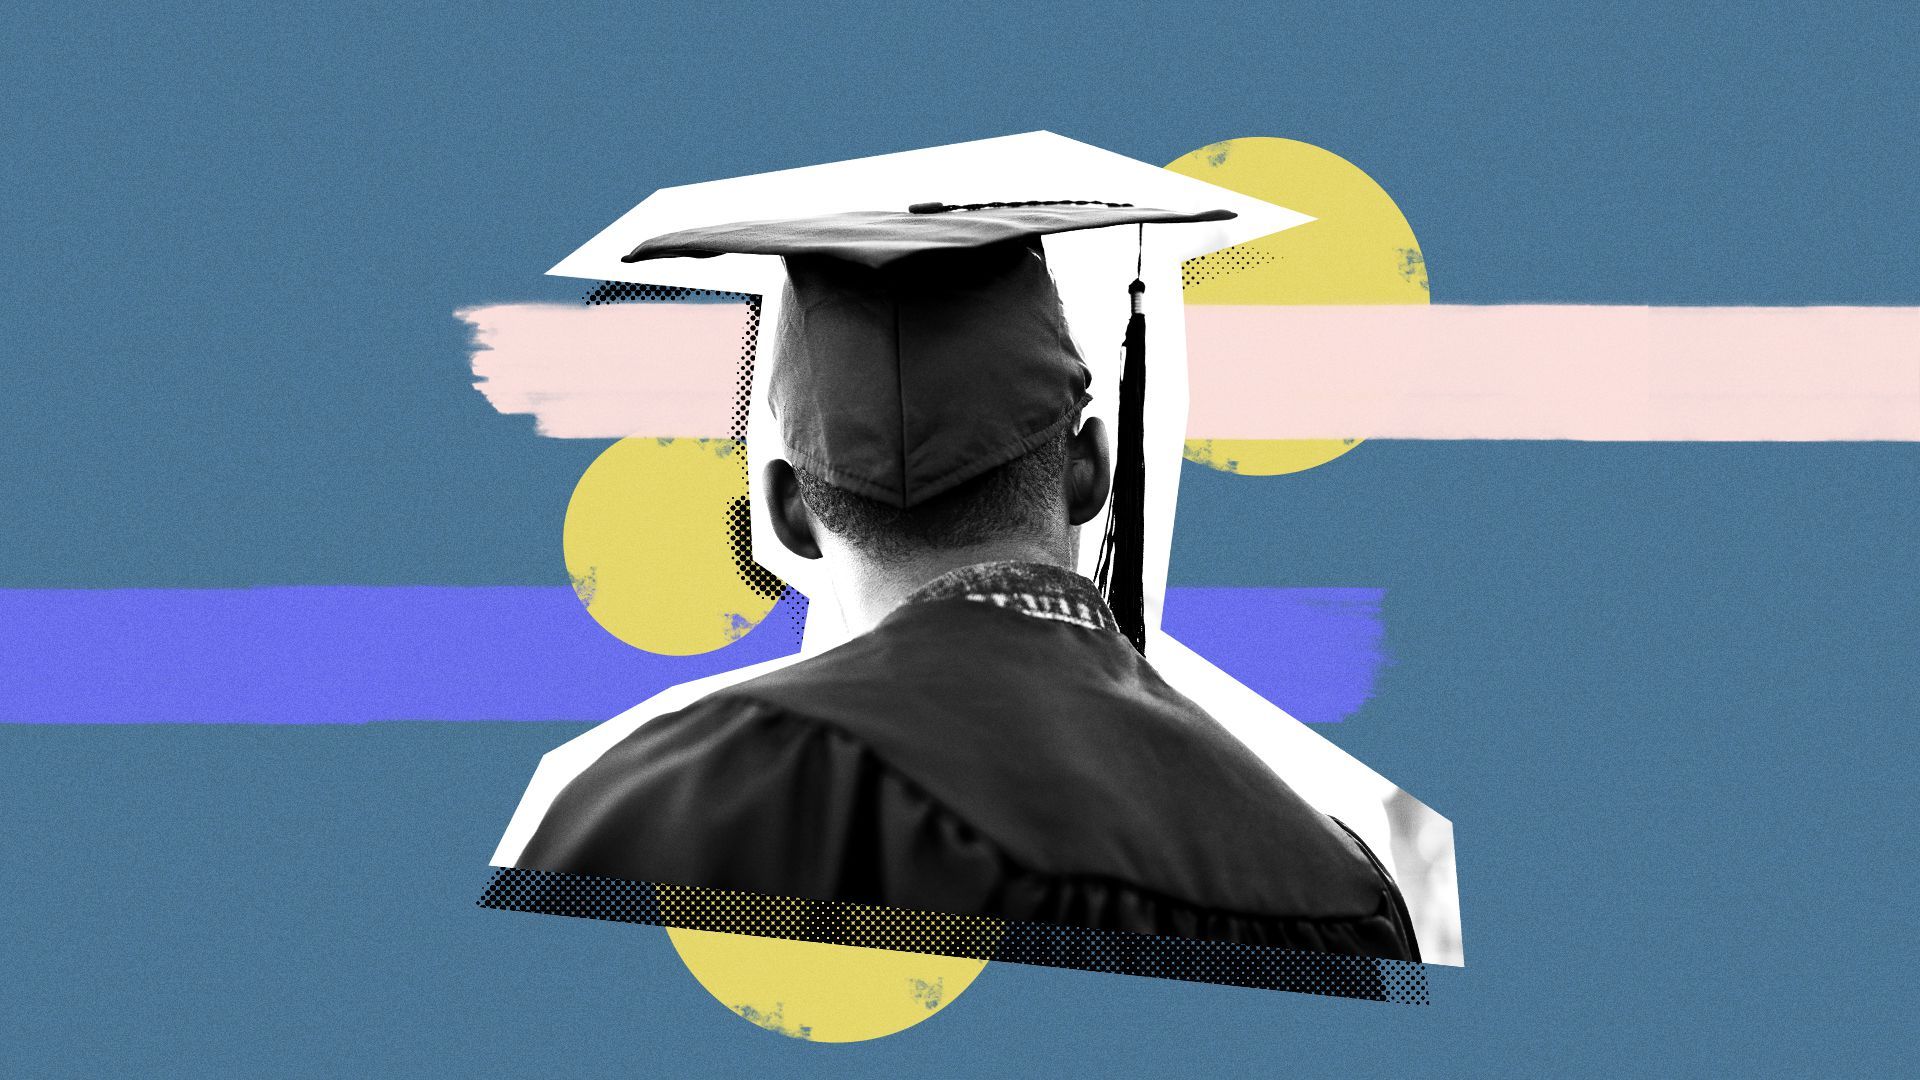 Illustration of a man in a graduation cap and gown from behind